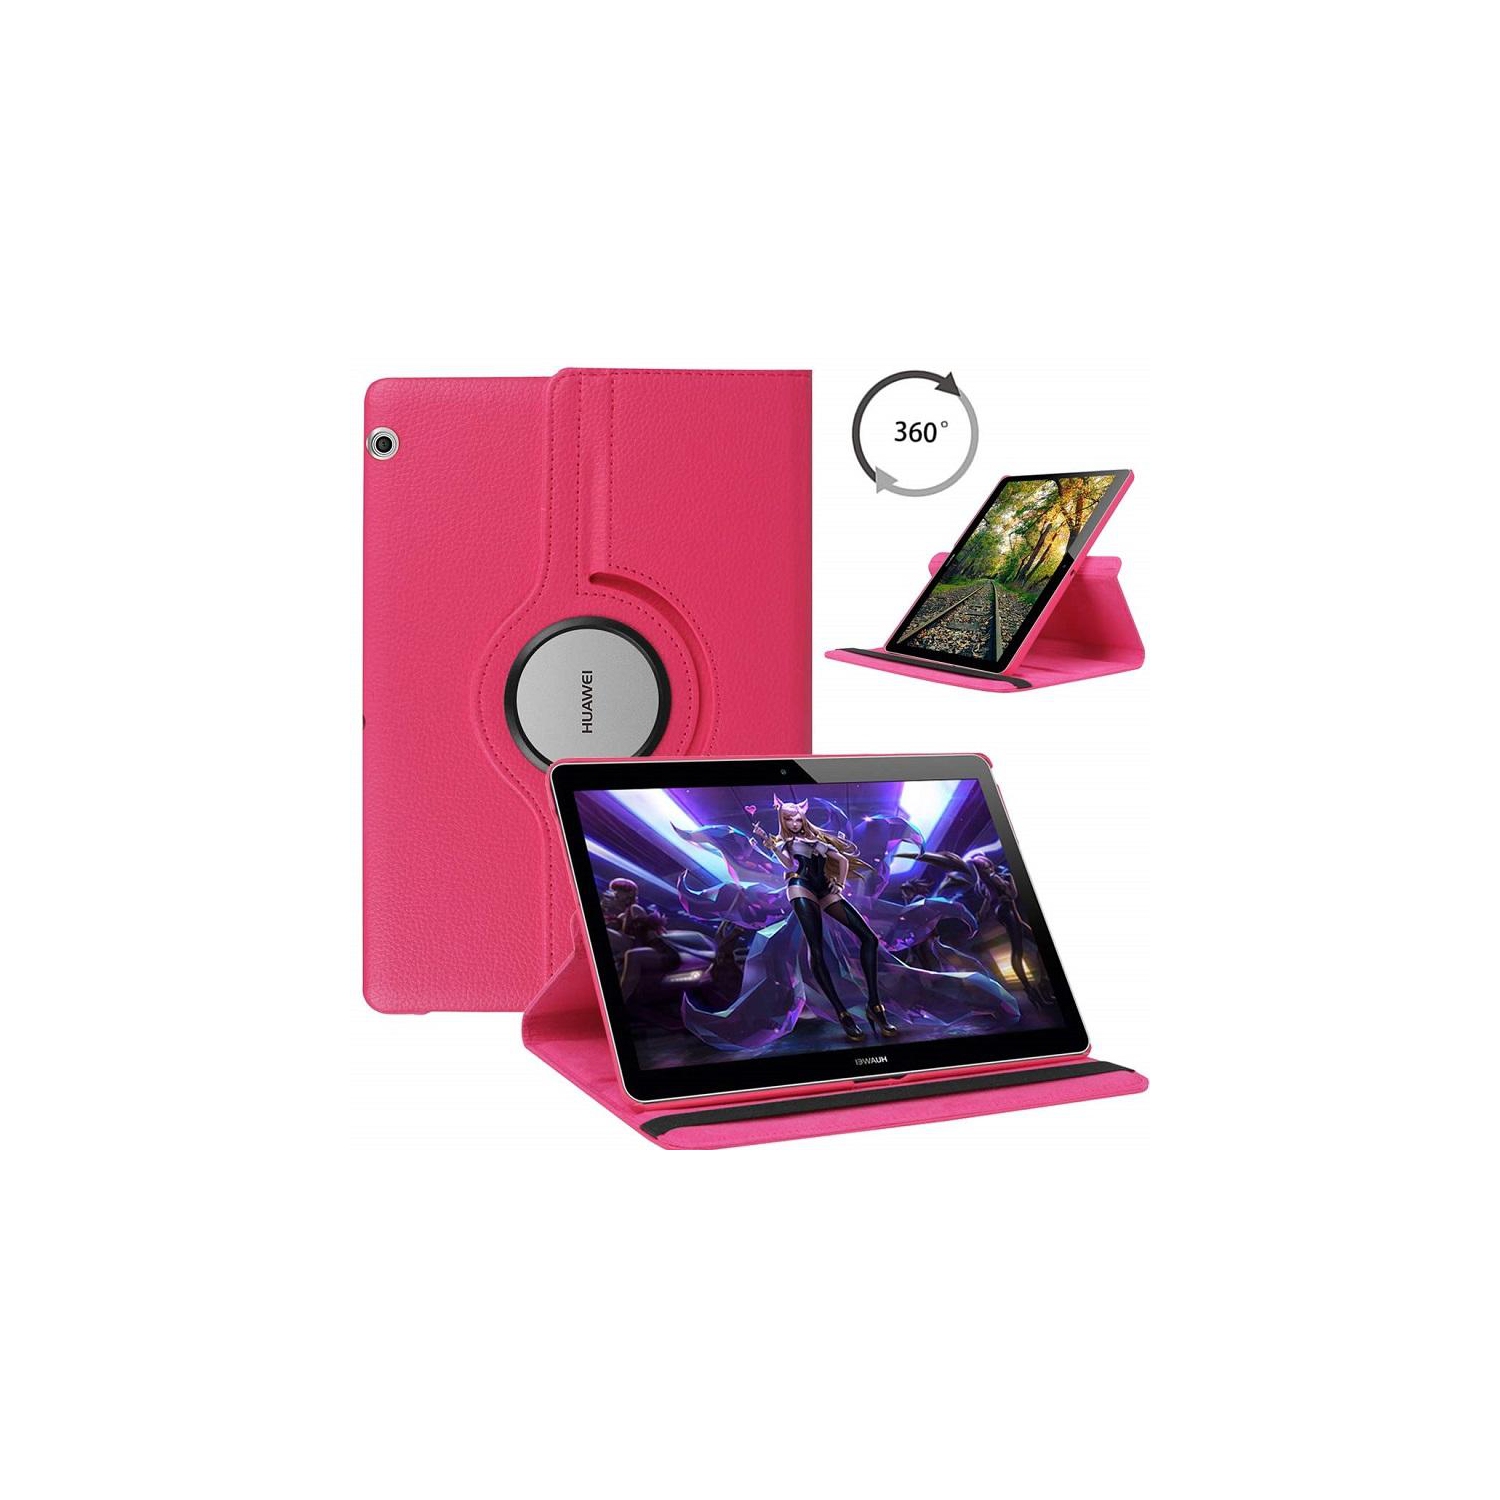 TopSave 360 Degree Rotating Tablet Case Cover For Huawei MediaPad T3, Hot Pink